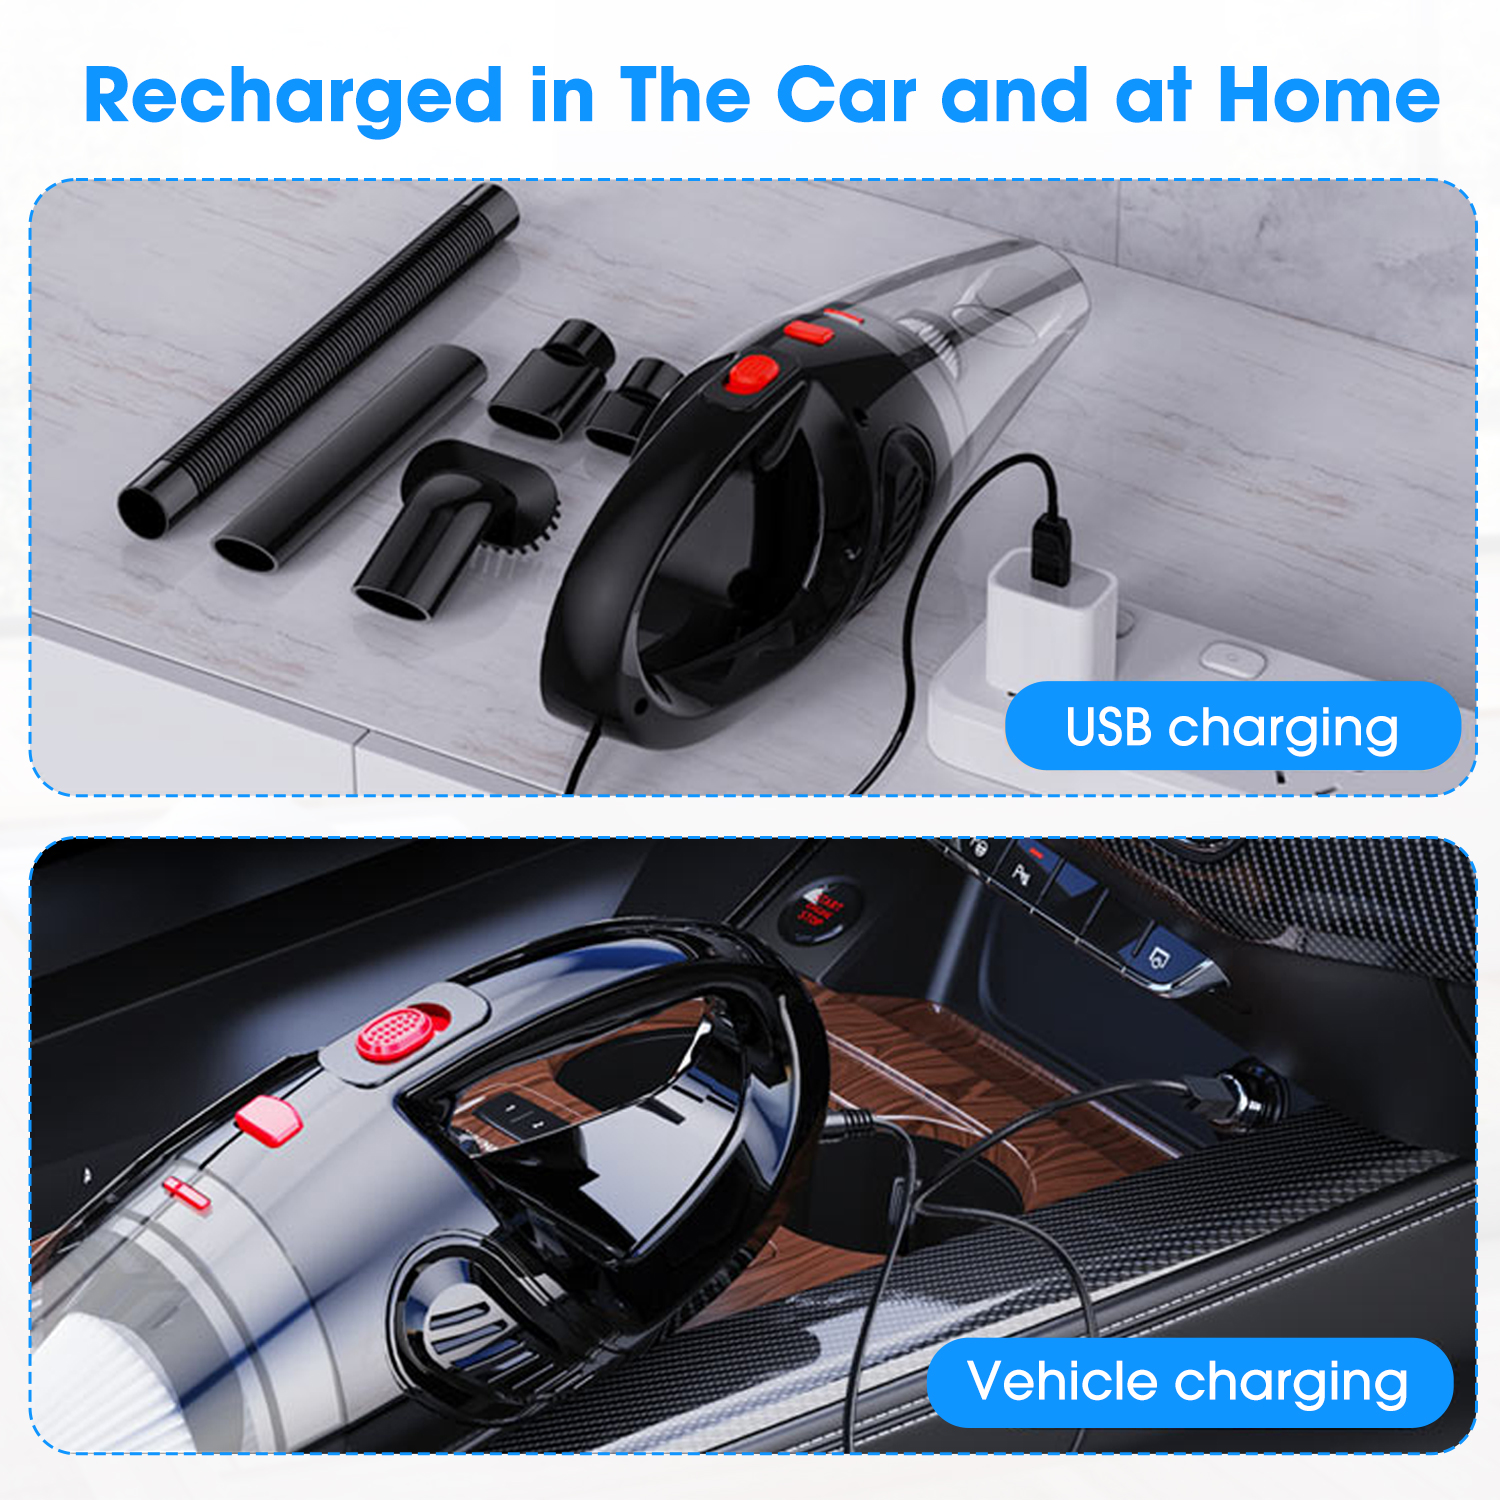 iFanze Handheld Vacuum Cordless, 6KPA Powerful Cyclonic Suction Vacuum Cleaner, Car Vacuum Cleaner, Portable Quick Charge Handheld Vacuum with Washable HEPA Filter for Car - image 2 of 10